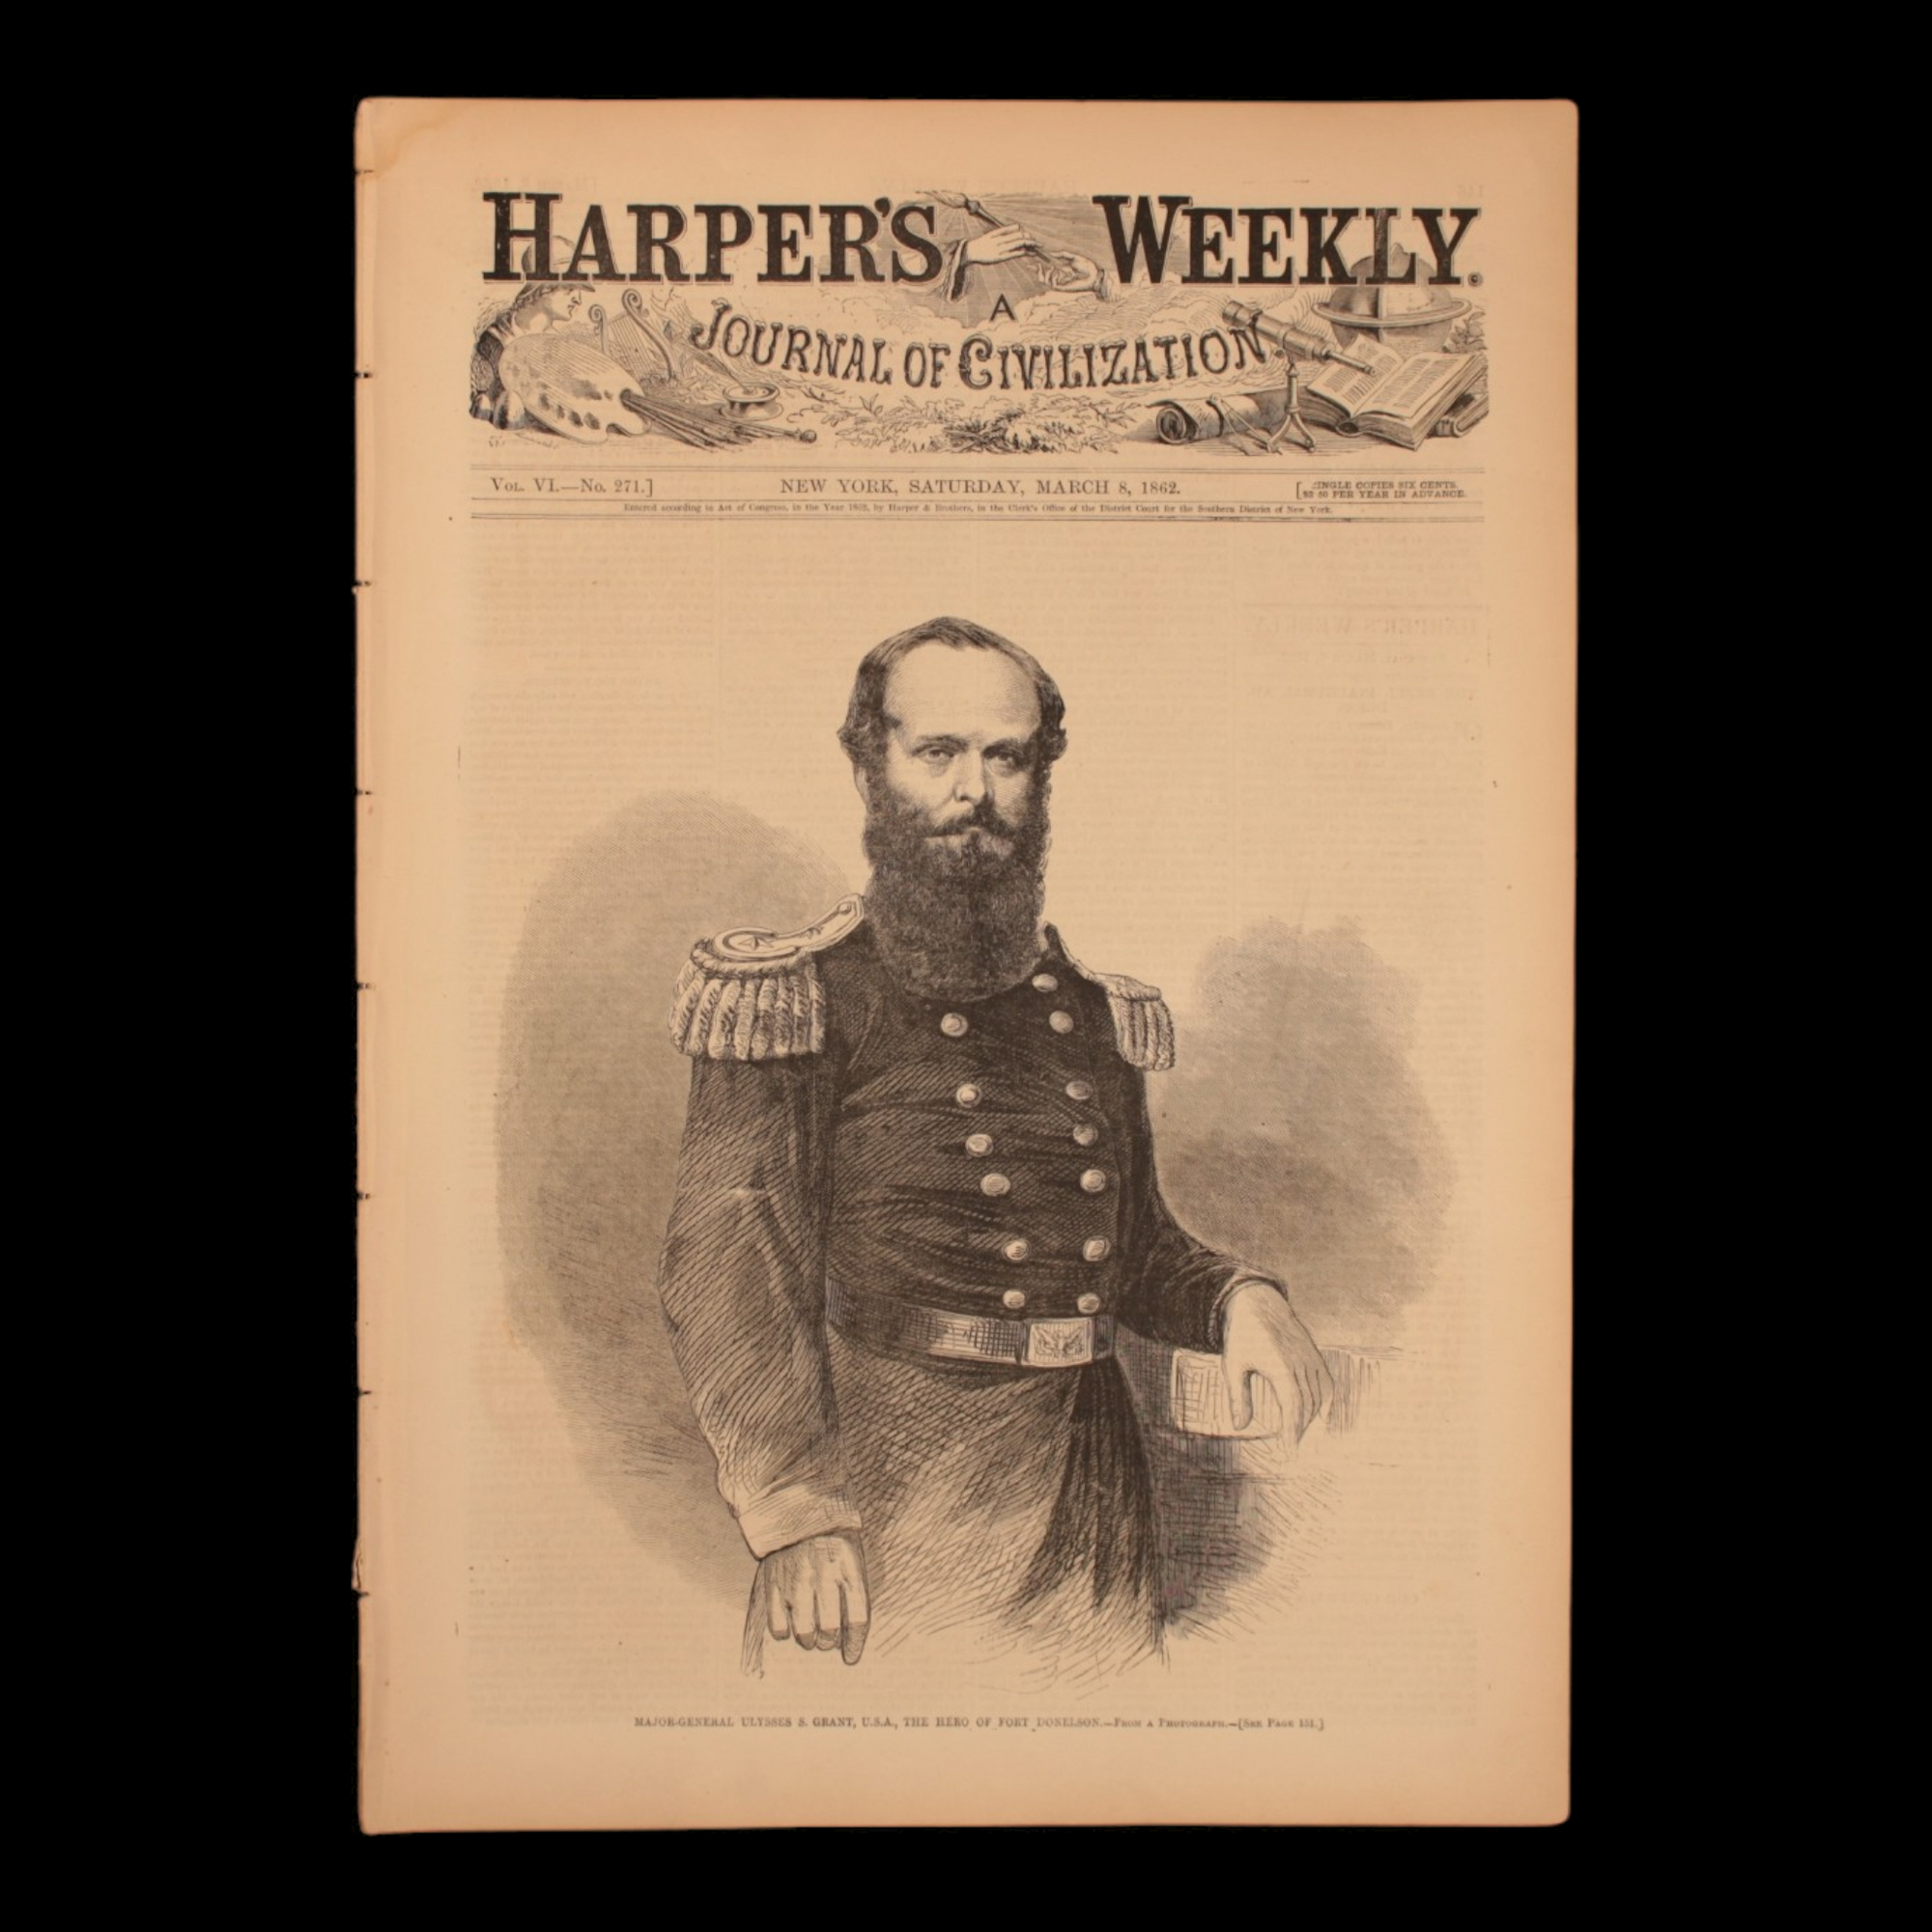 Harper's Weekly — Ulysses S. Grant Cover, Battle of Fort Donelson Engraving